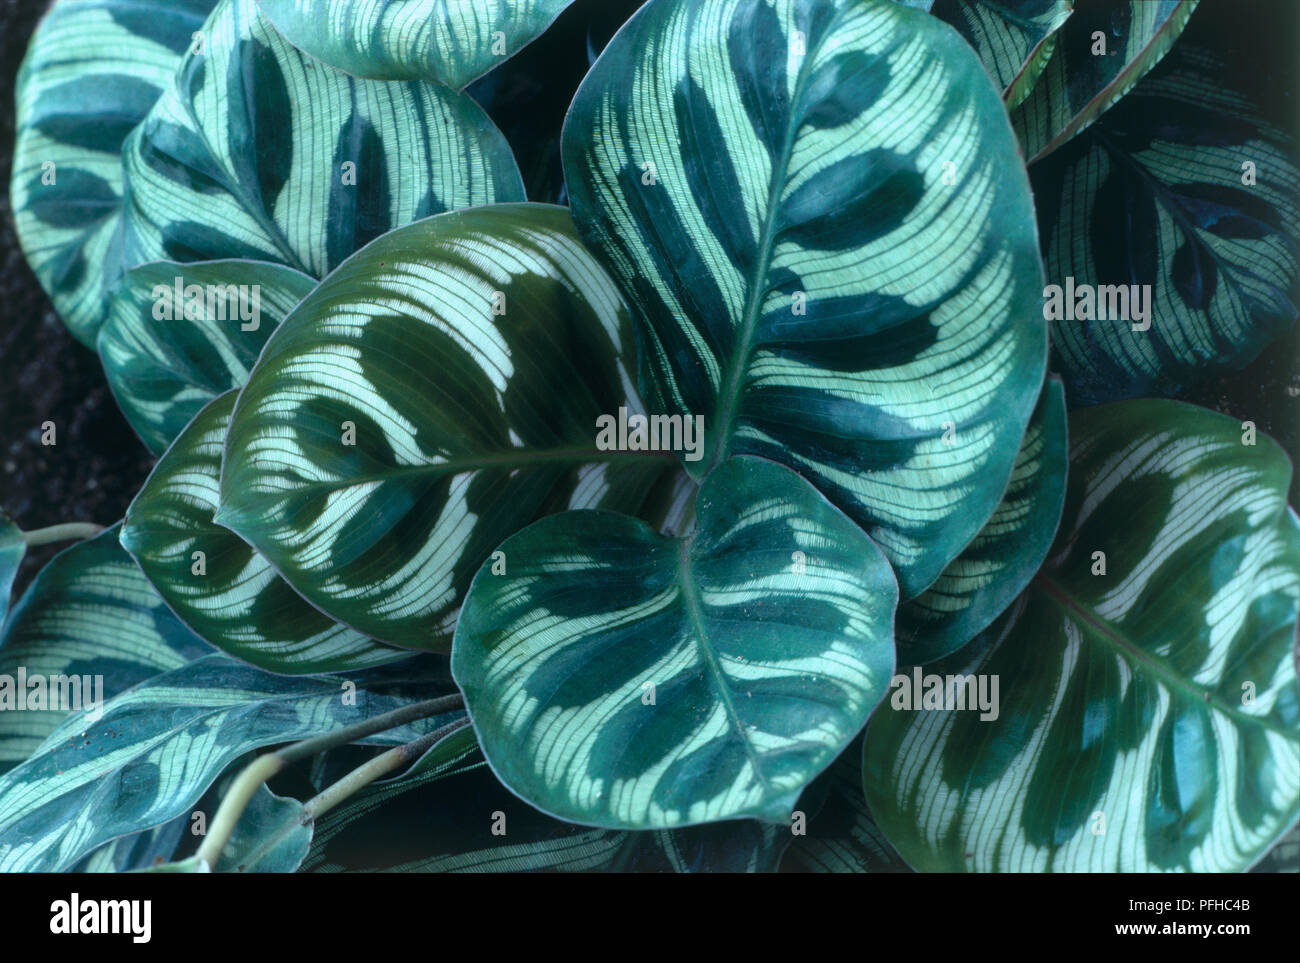 Variegated leaves from Calathea makoyana (Peacock plant), close-up Stock Photo